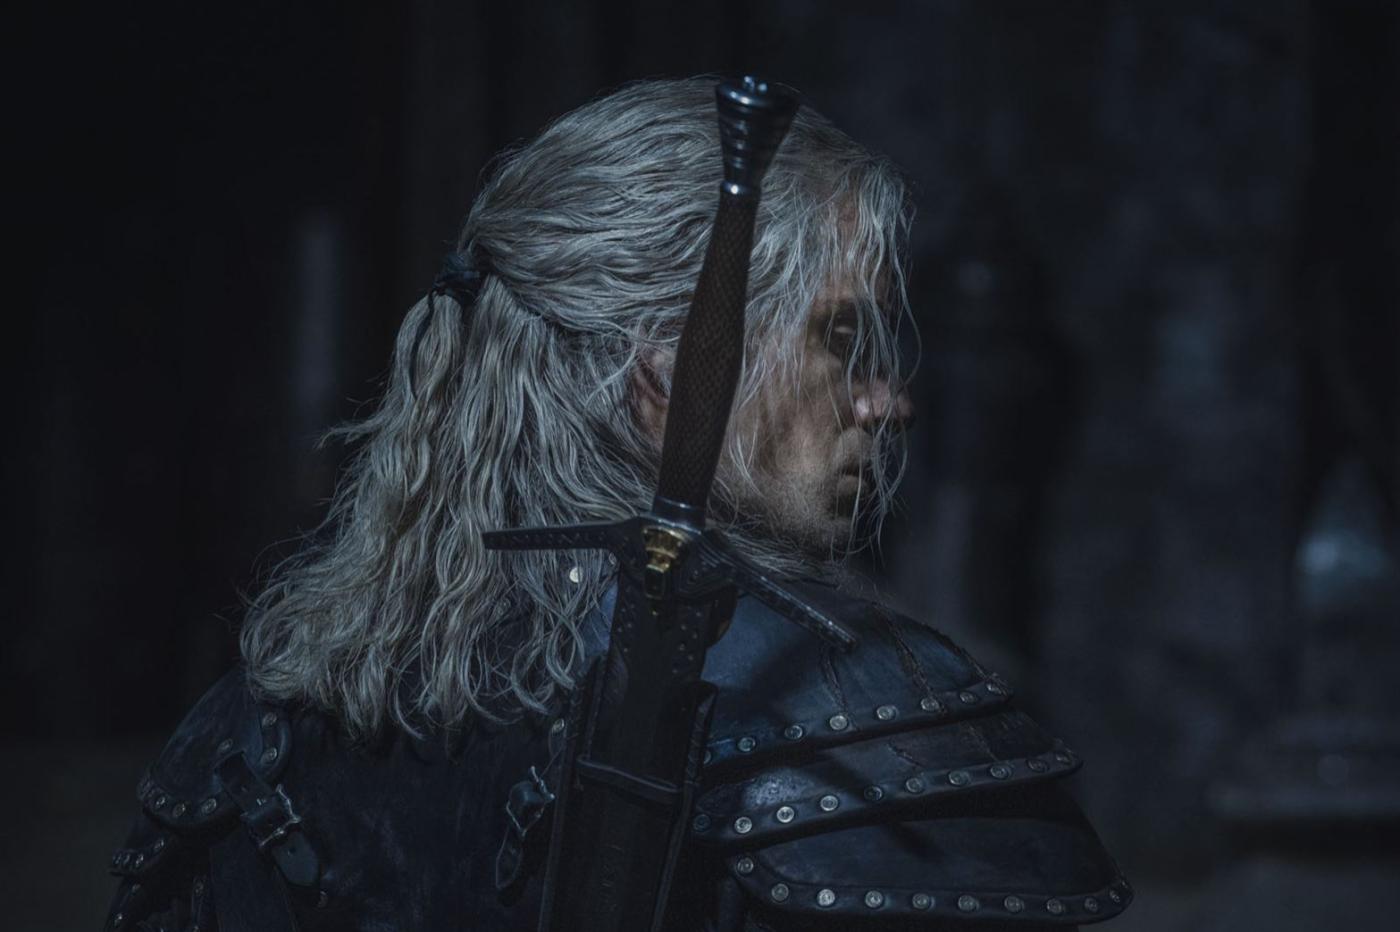 The witcher henry cavill grand fan